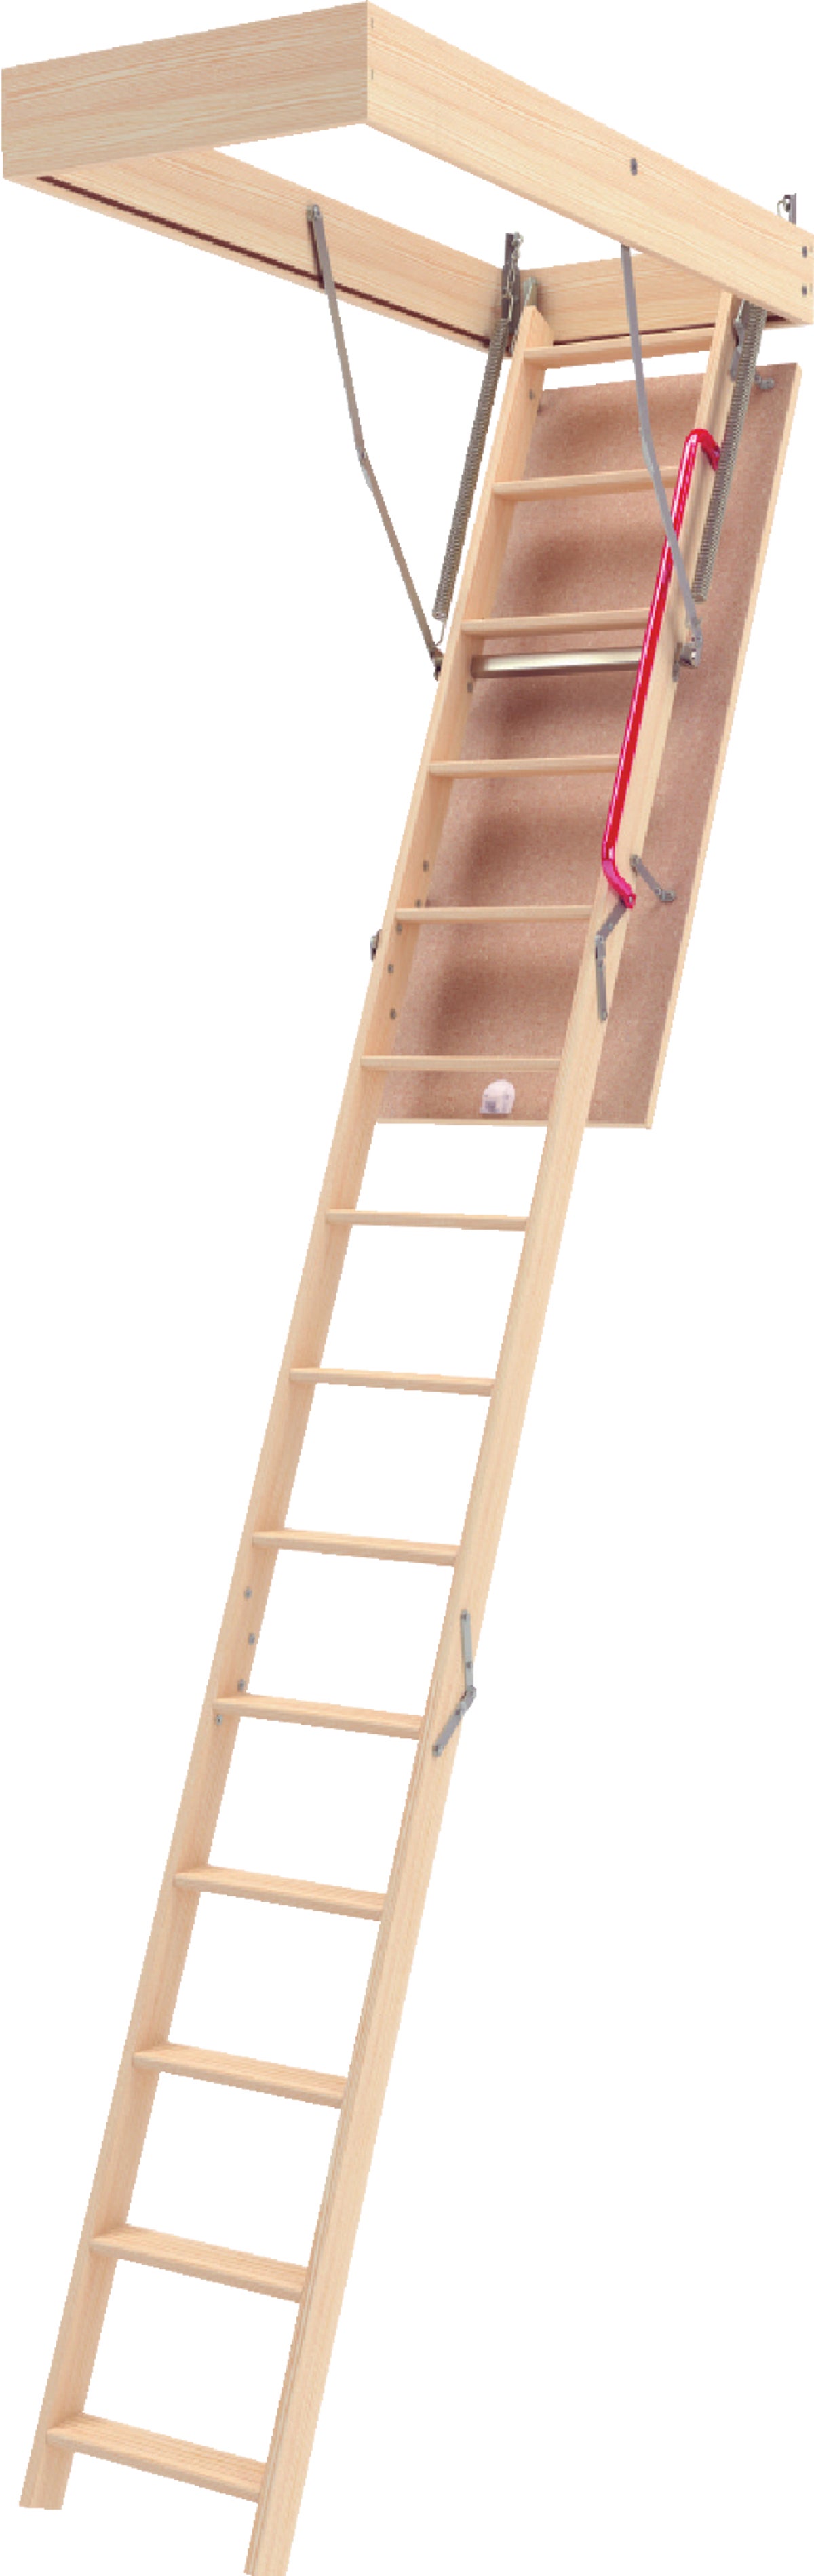 WERNER Straight Ladder: 12 ft Ladder Ht, 18 1/8 in Overall Wd, D-Rung, 21.5  lb Net Wt